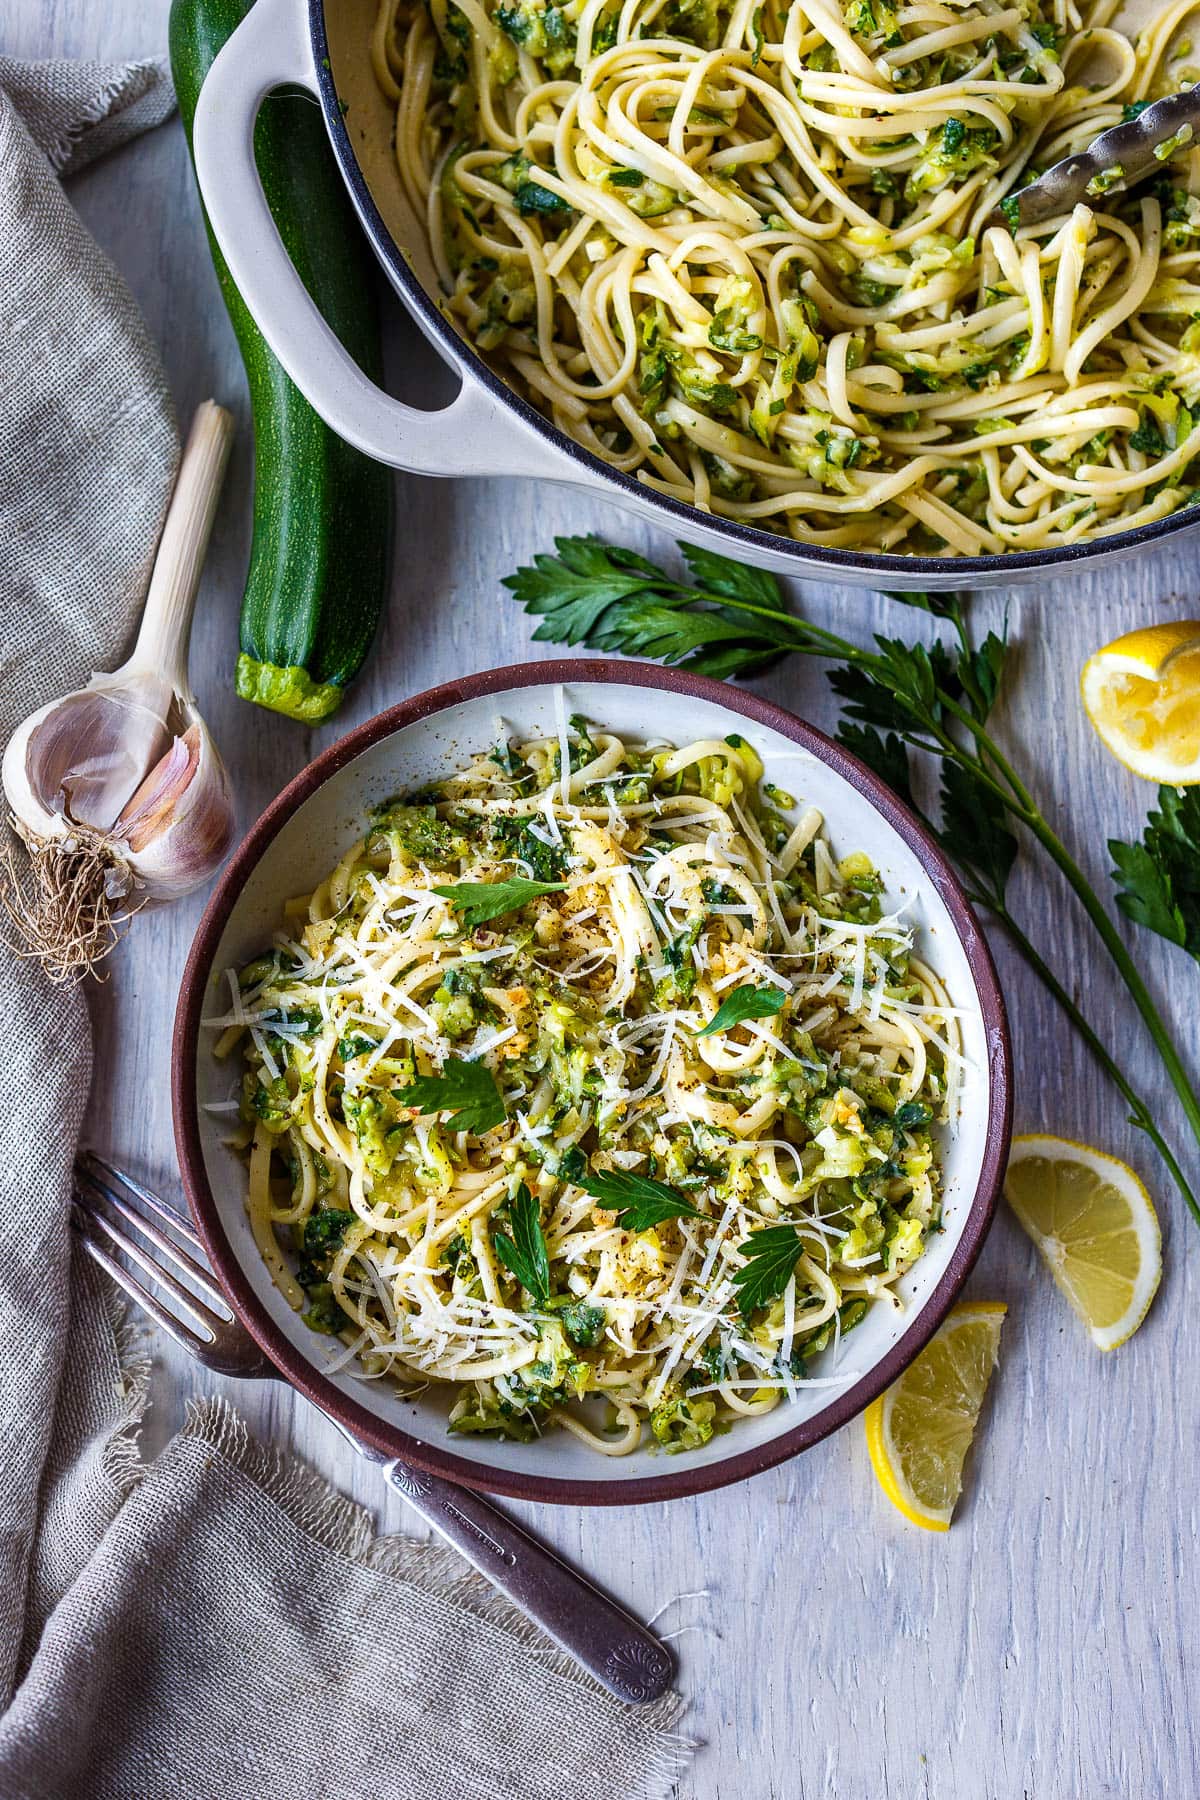 Here's a quick and simple recipe for creamy Zucchini Pasta. Grated zucchini melts into a flavorful succulent sauce, perfect for cradling linguini or your favorite pasta! Enhanced with lemon, black pepper and garlic you'll have this on the table in 30 minutes!  Vegan and gluten-free adaptable.